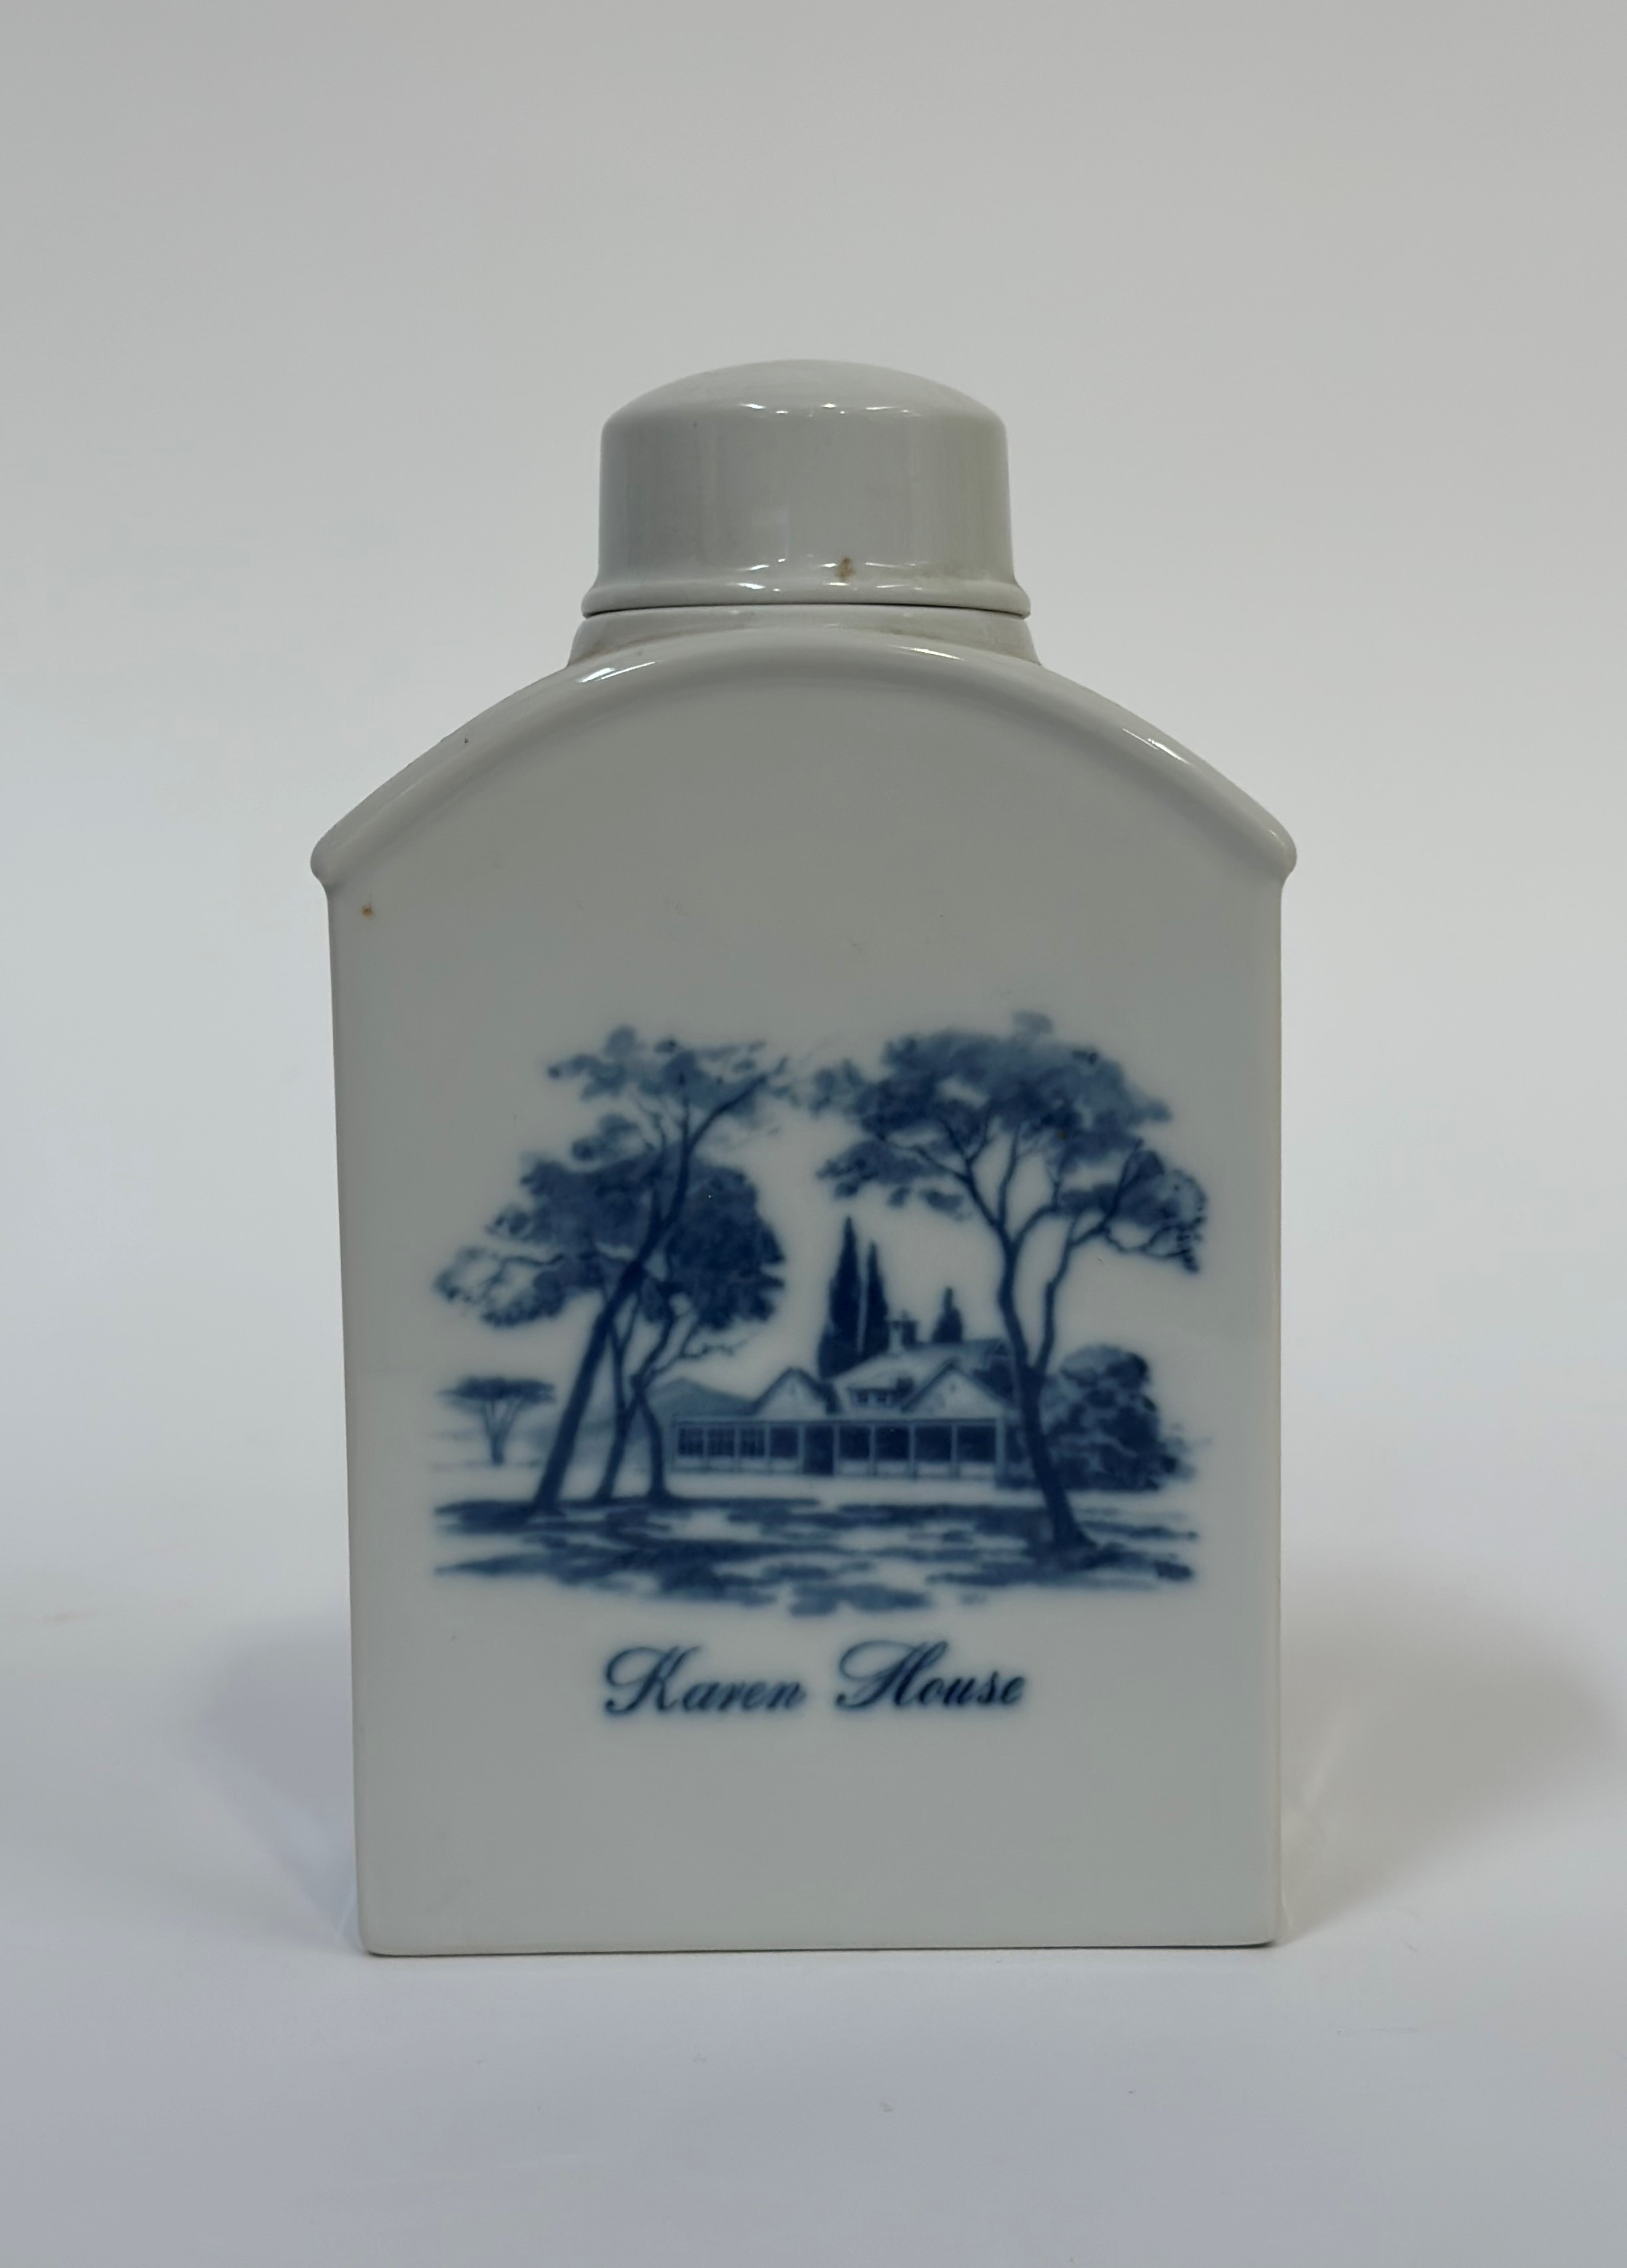 Royal Copenhagen, a blue and white tea caddy depicting a man and dog and a rural scene labelled '